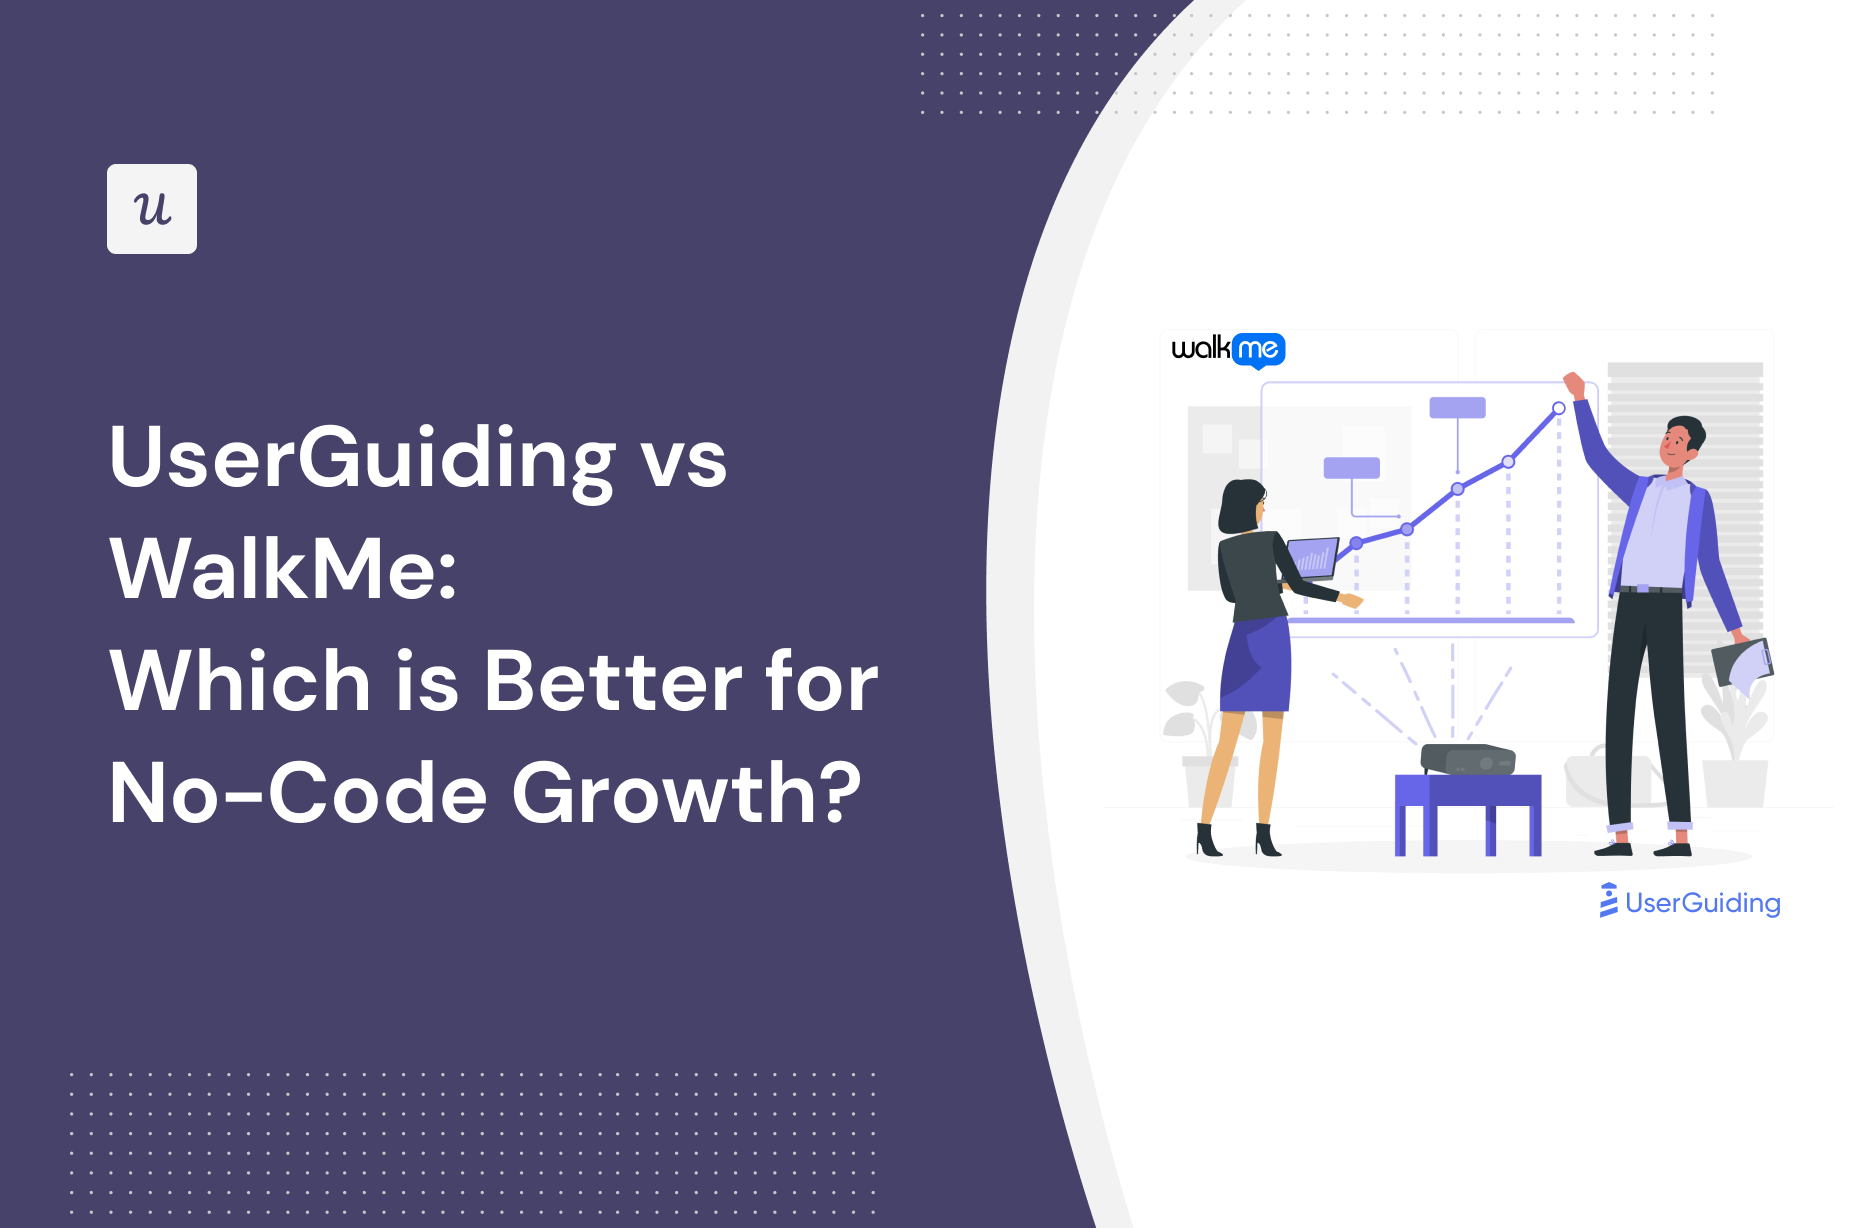 UserGuiding vs WalkMe: Which is Better for No-Code Growth?